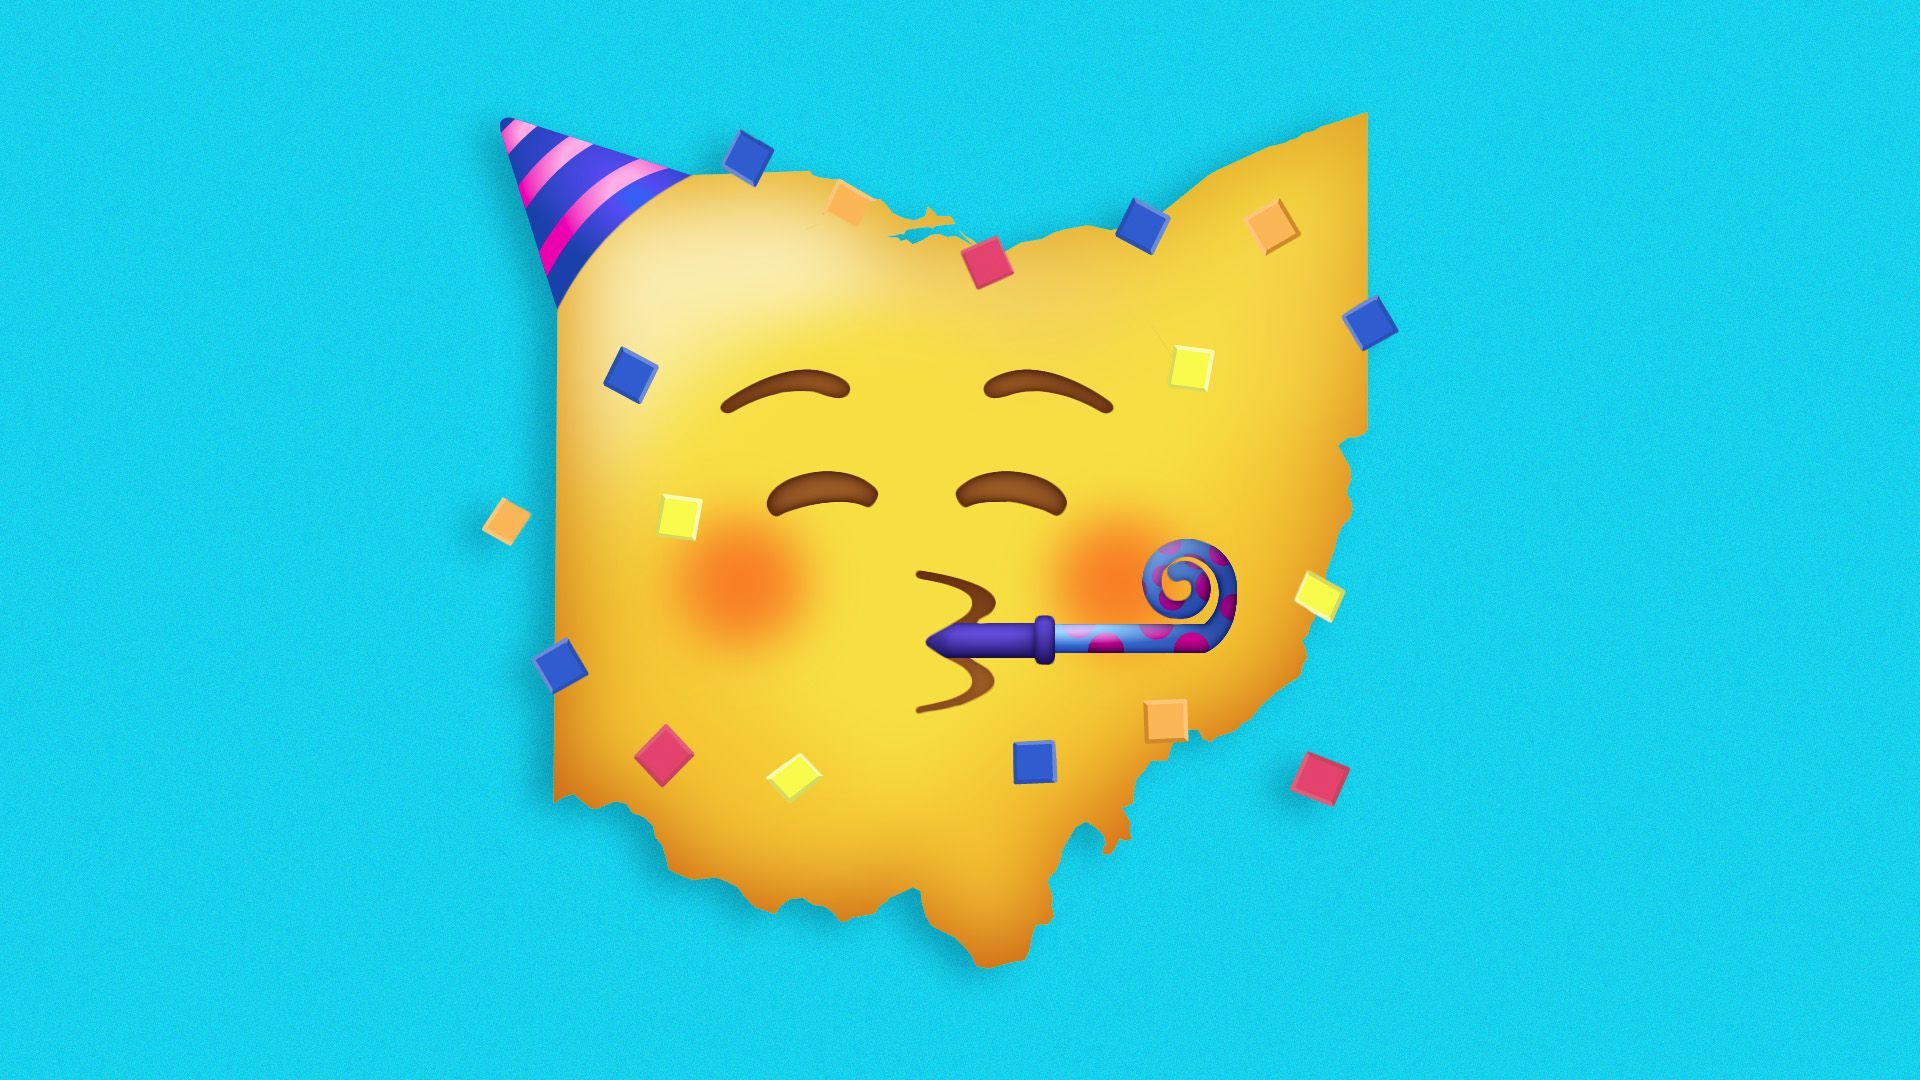 Illustration of the party emoji in the shape of Ohio.